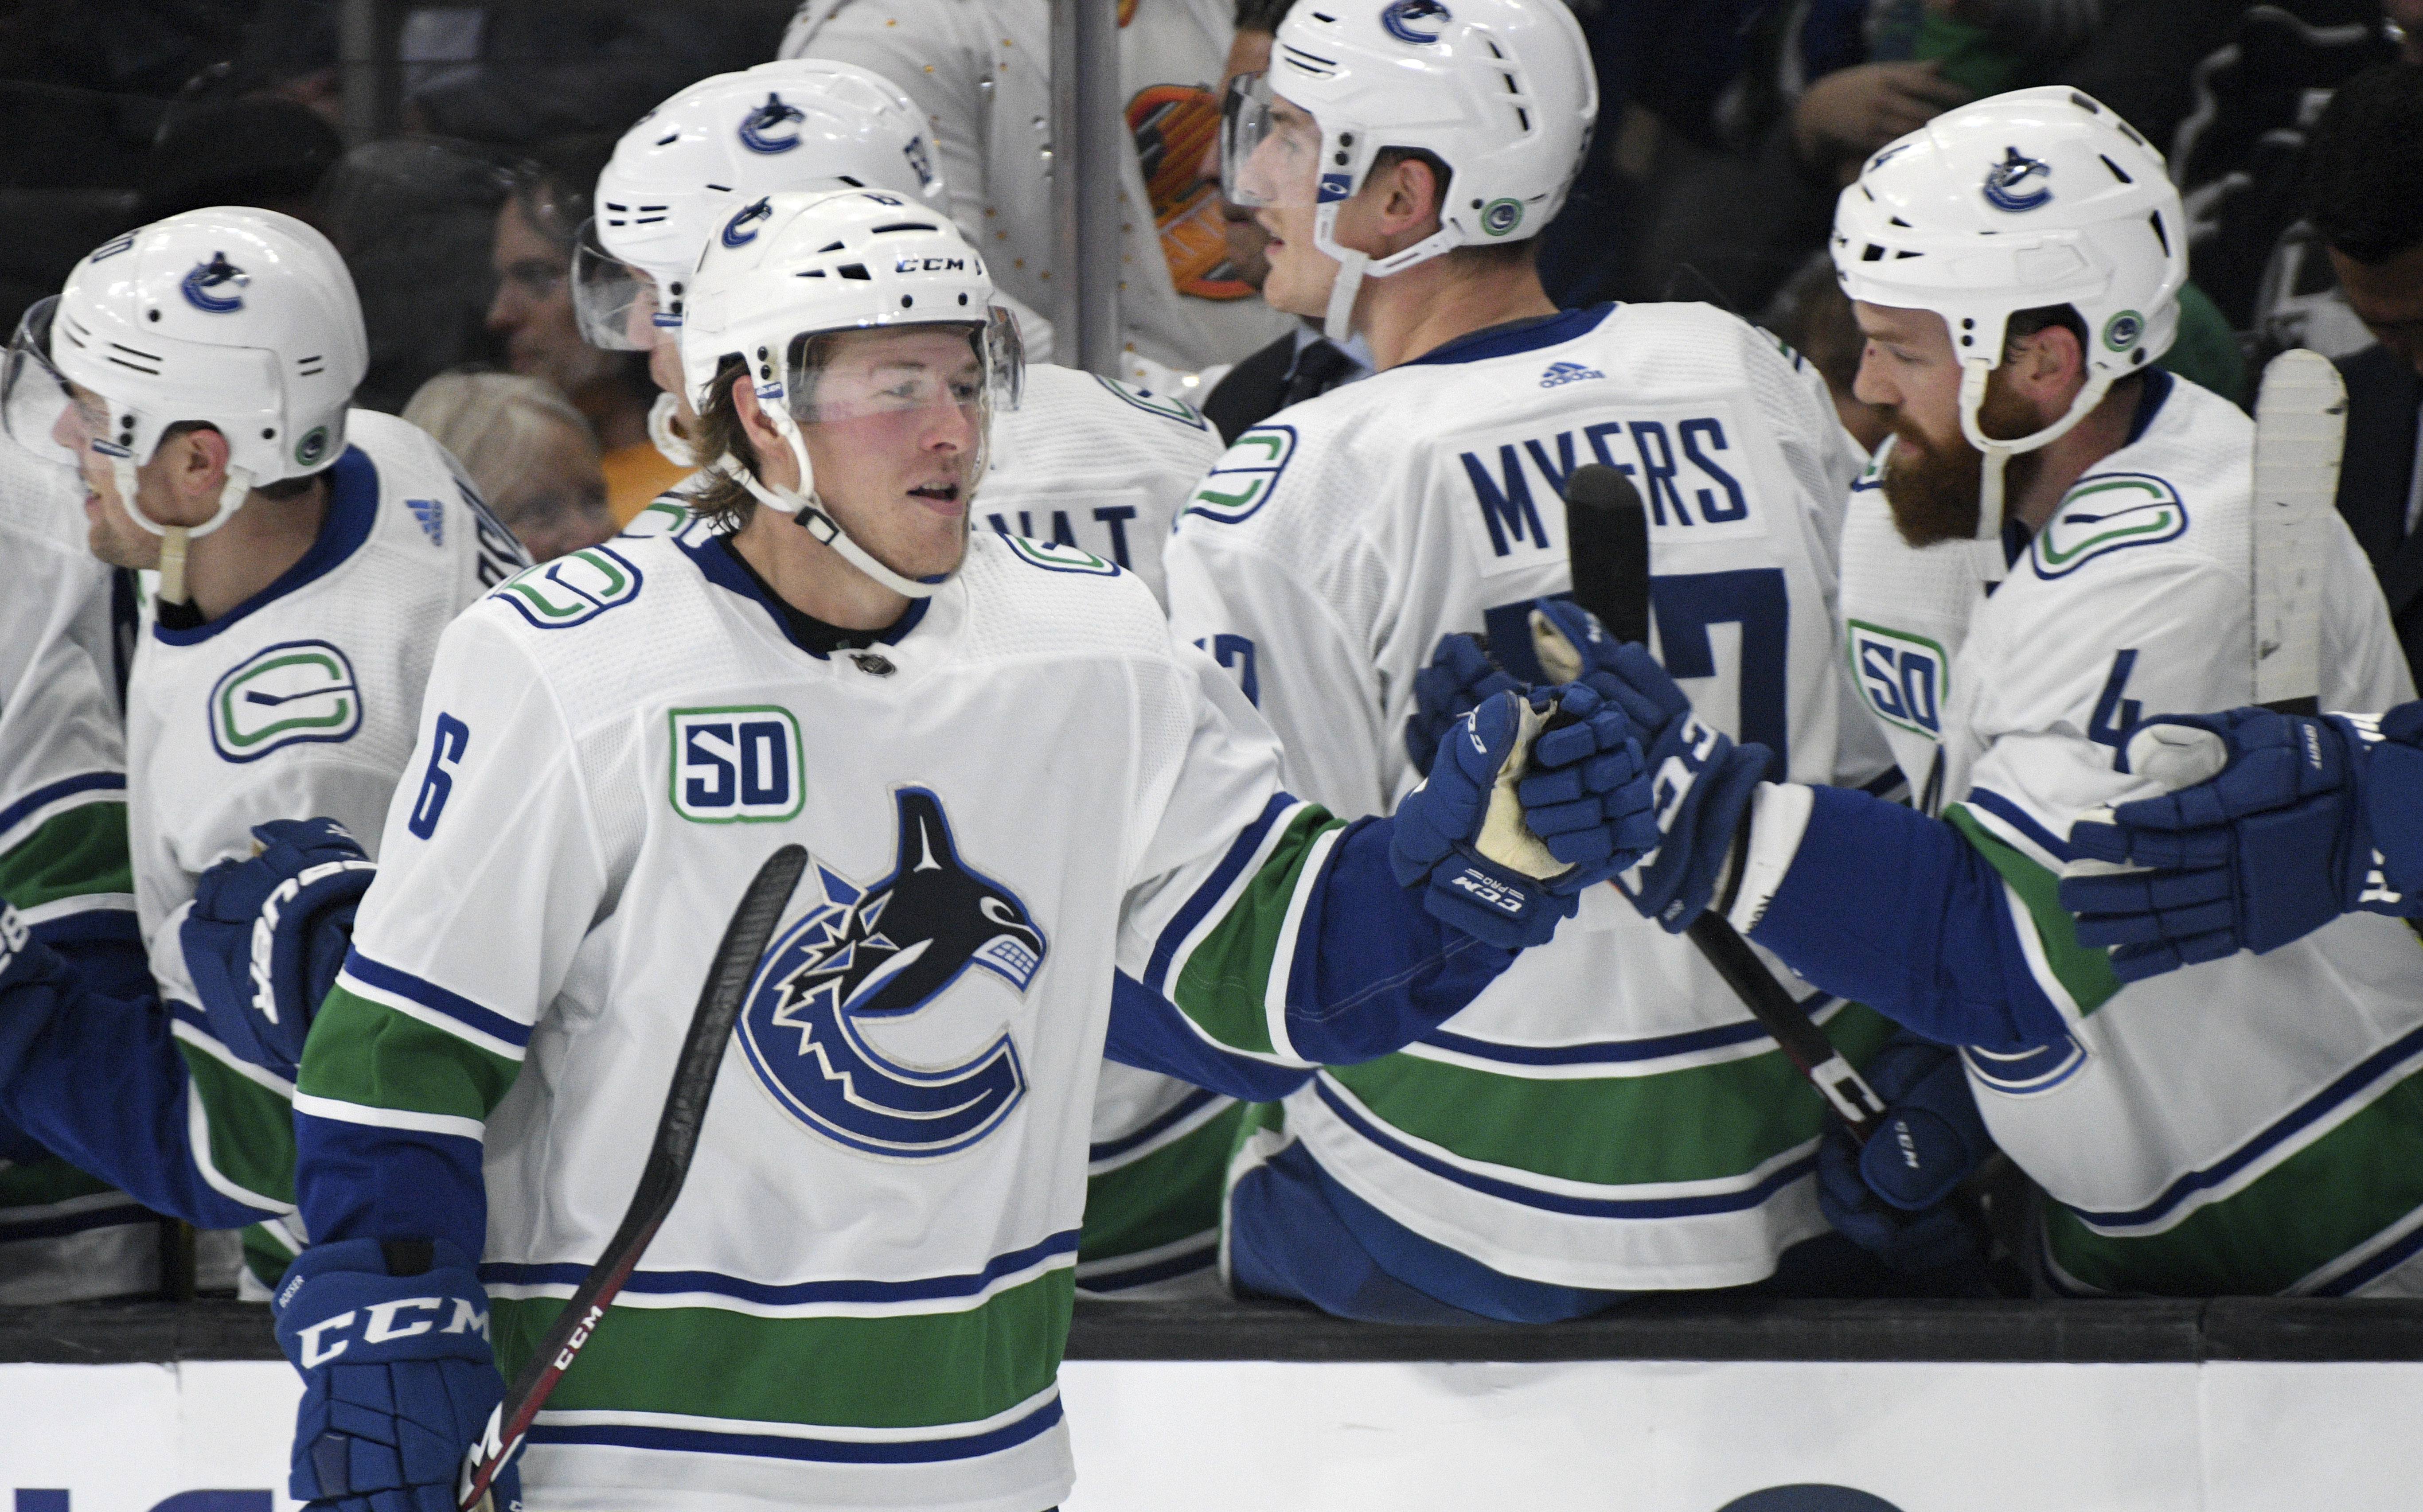 Boeser, Pettersson push Canucks to 5-3 win over Kings